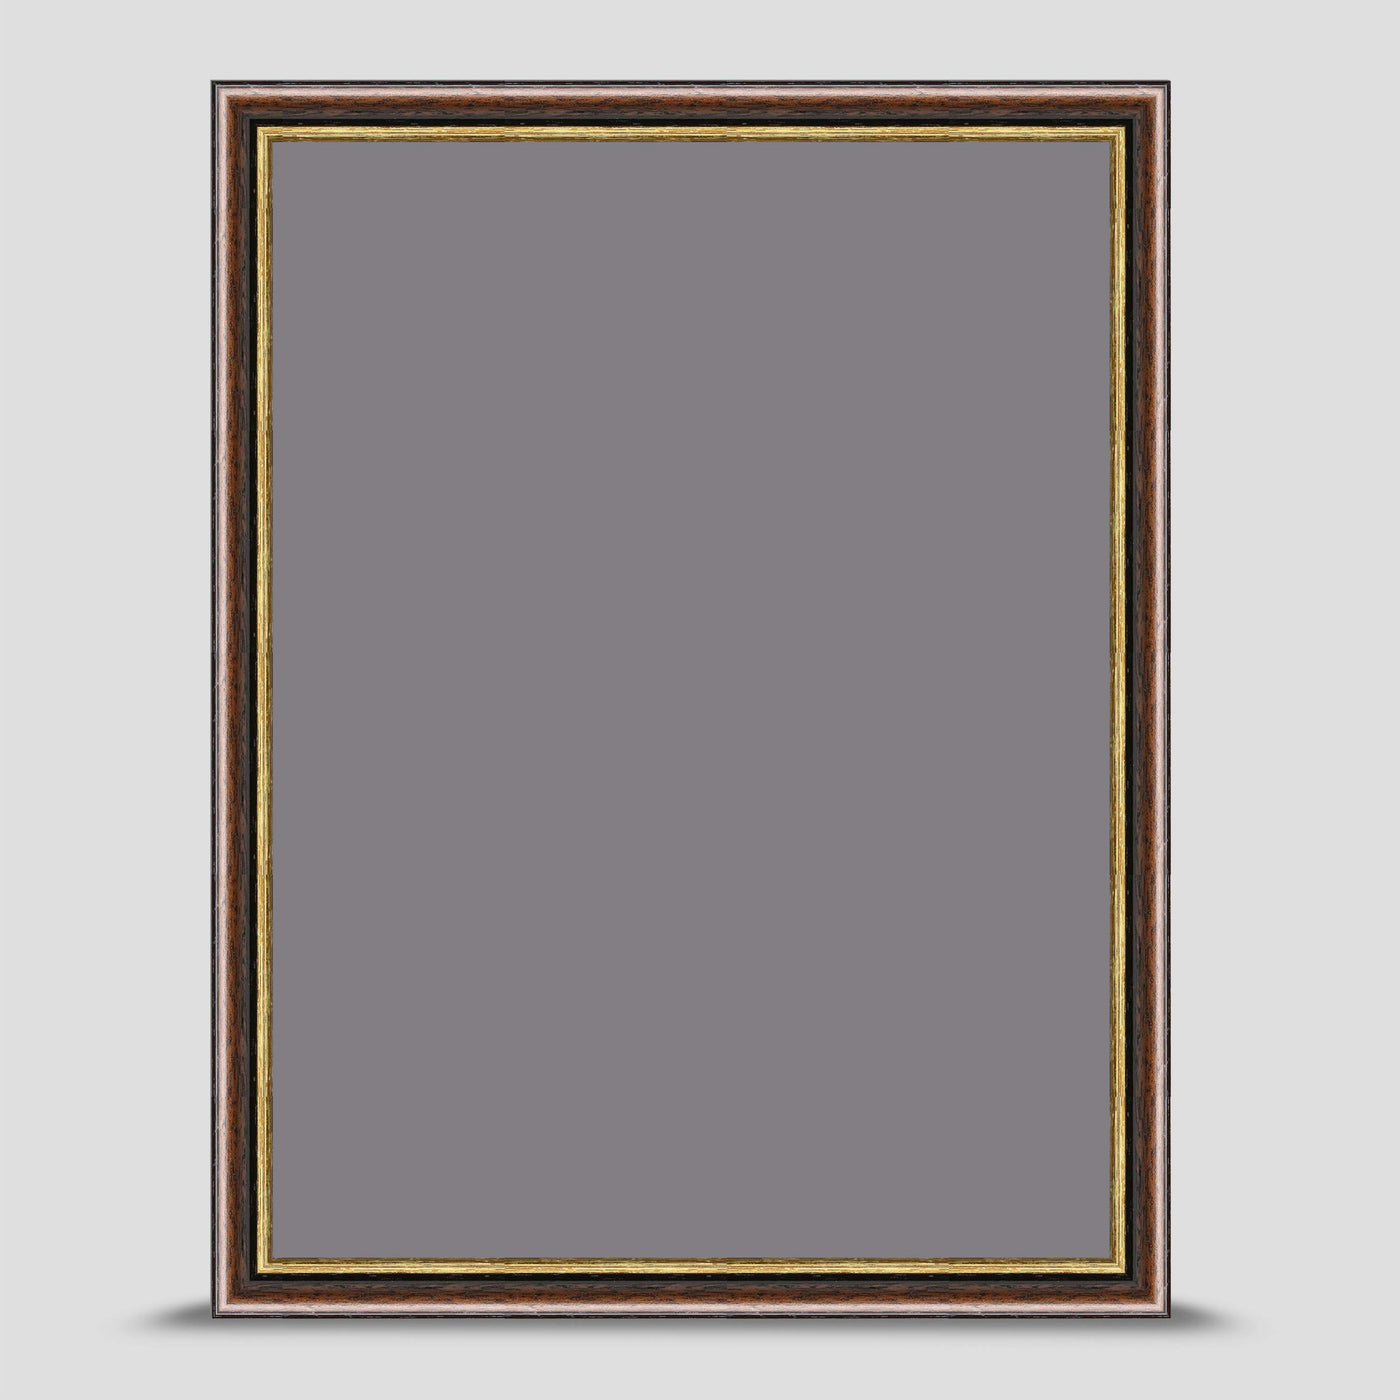 A4 Certificate and Document Brown & Gold Photo Frame